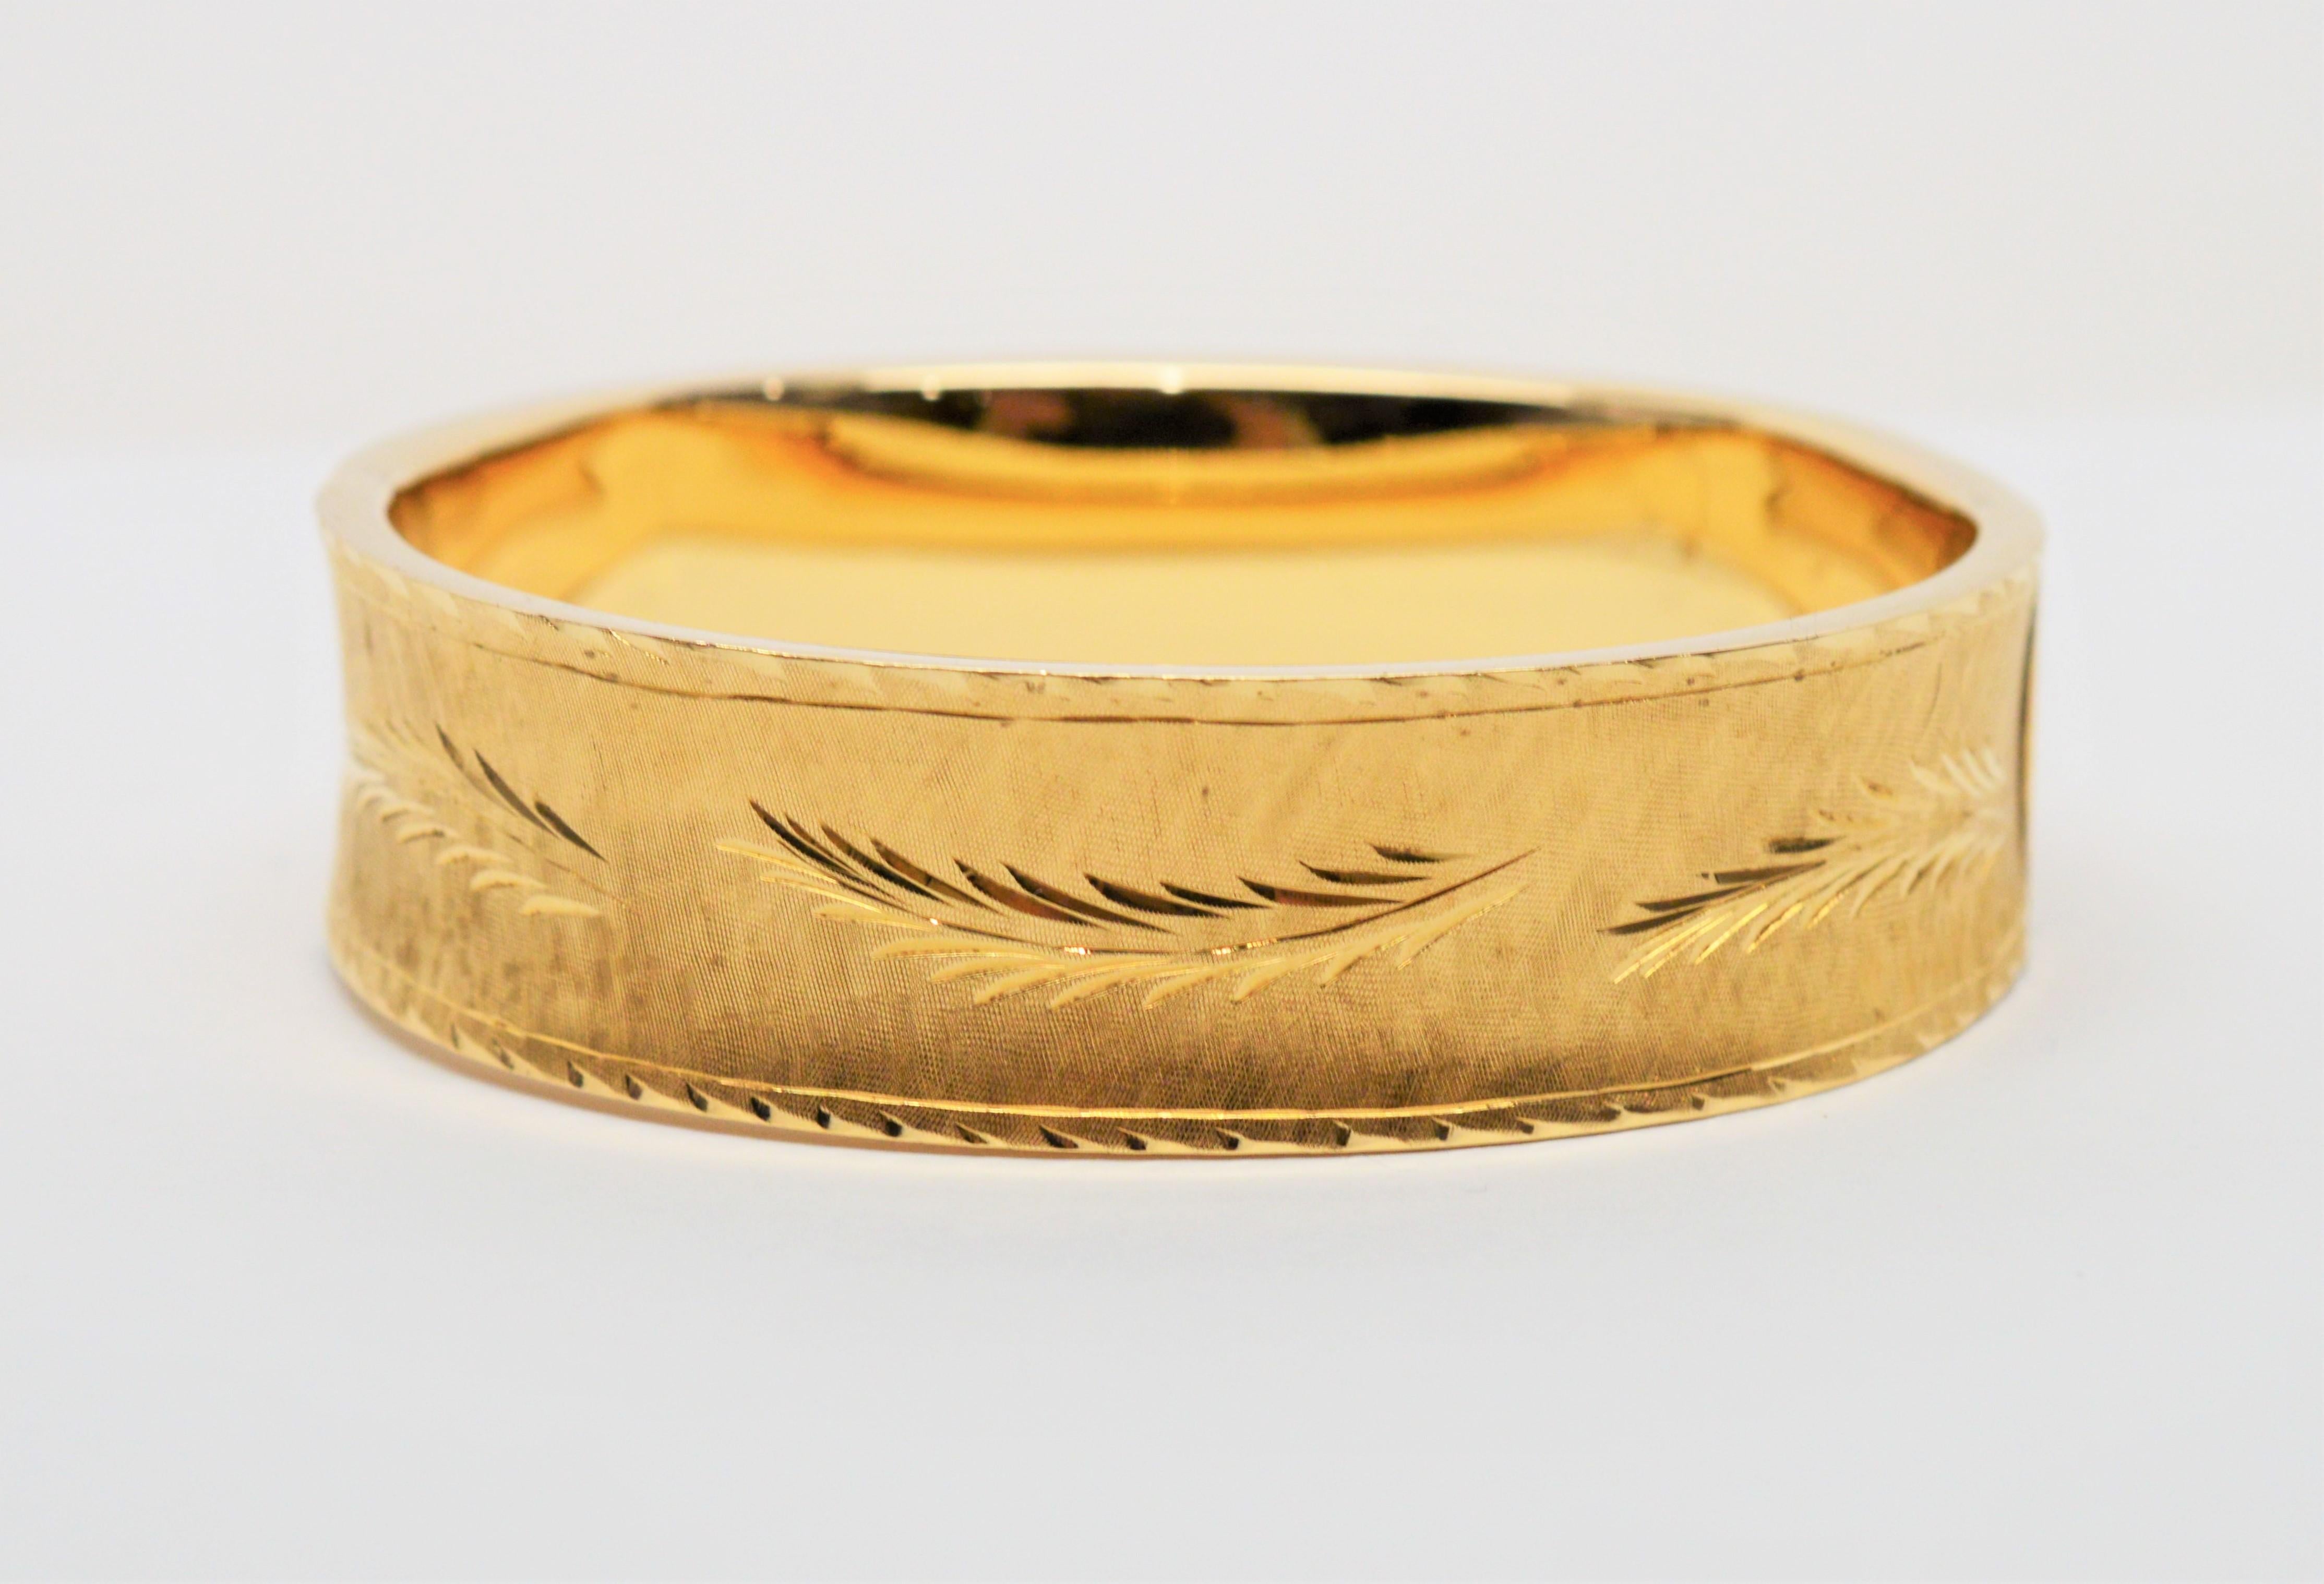 Artistry thru the use of texture and shine are the highlights of this hand engraved fourteen carat 14K yellow gold bangle bracelet.  Measuring  2-1/2 x 2-1/4 inches and approximately 1/2 inch wide, a bright and elegant engraved leaf design encircles